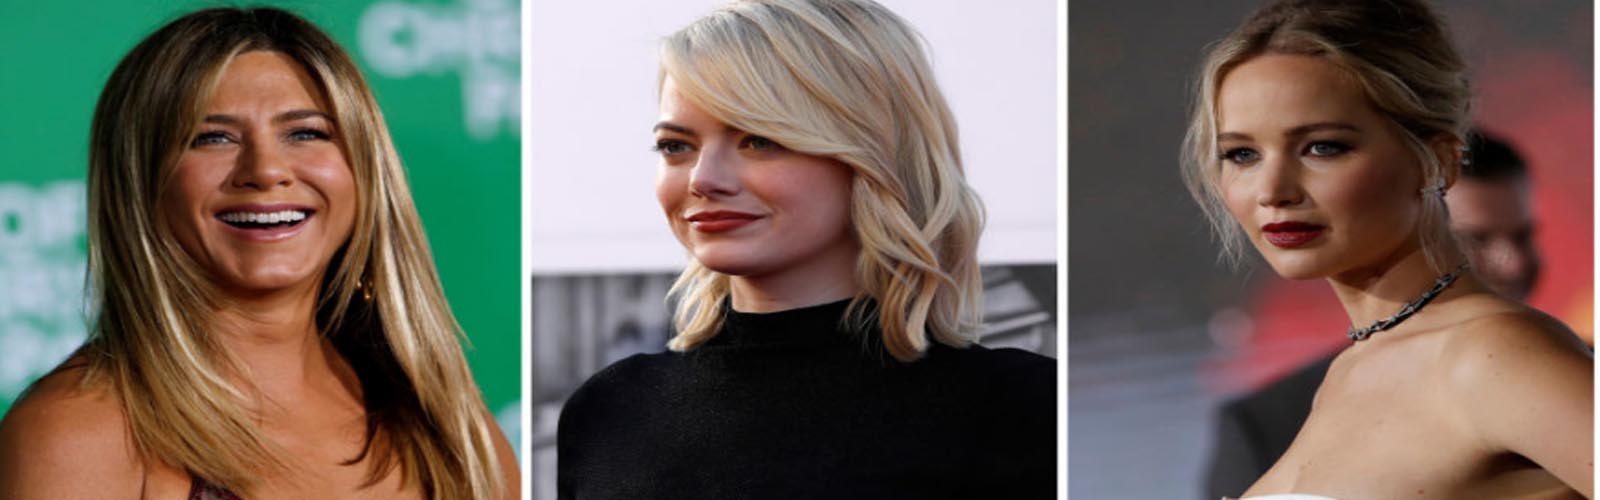 World's highest-paid actresses